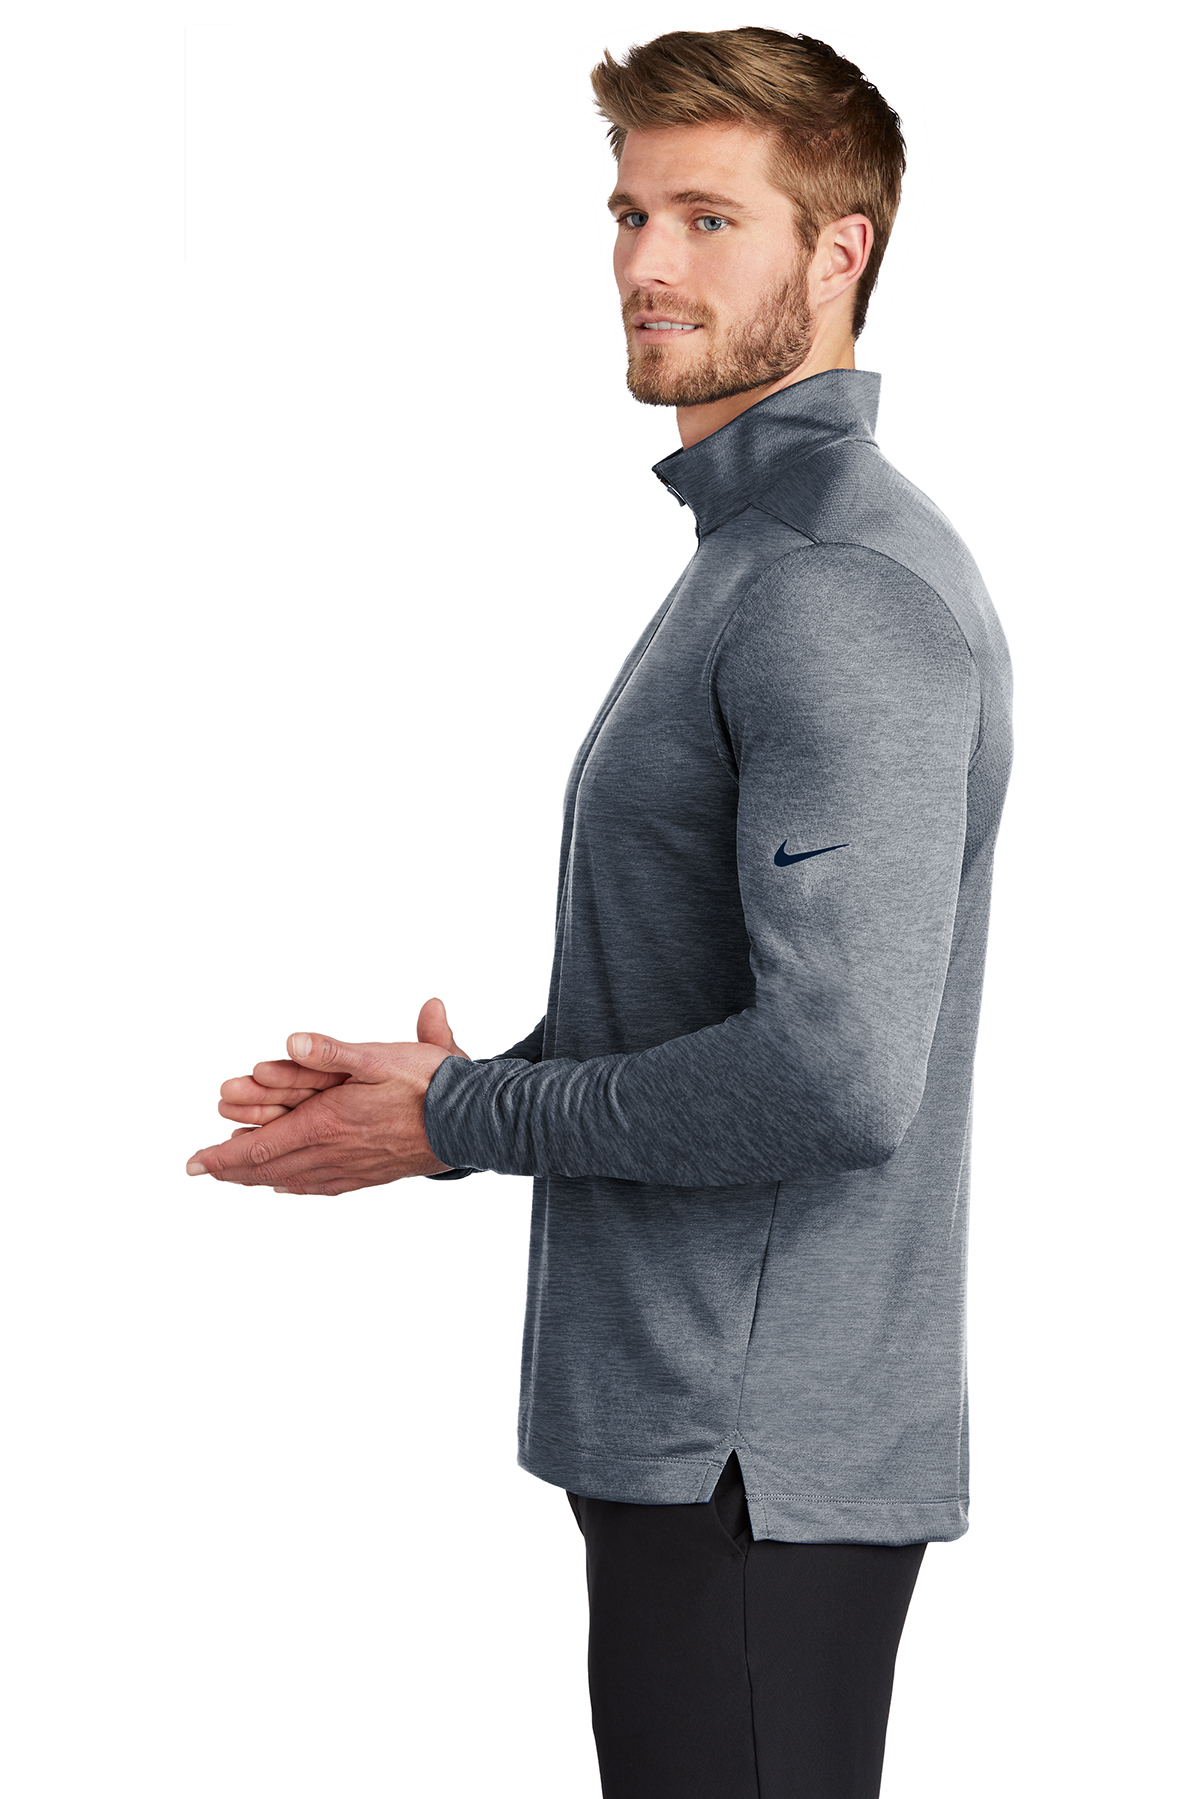 Nike Dry | 1/2-Zip | SanMar Product Cover-Up